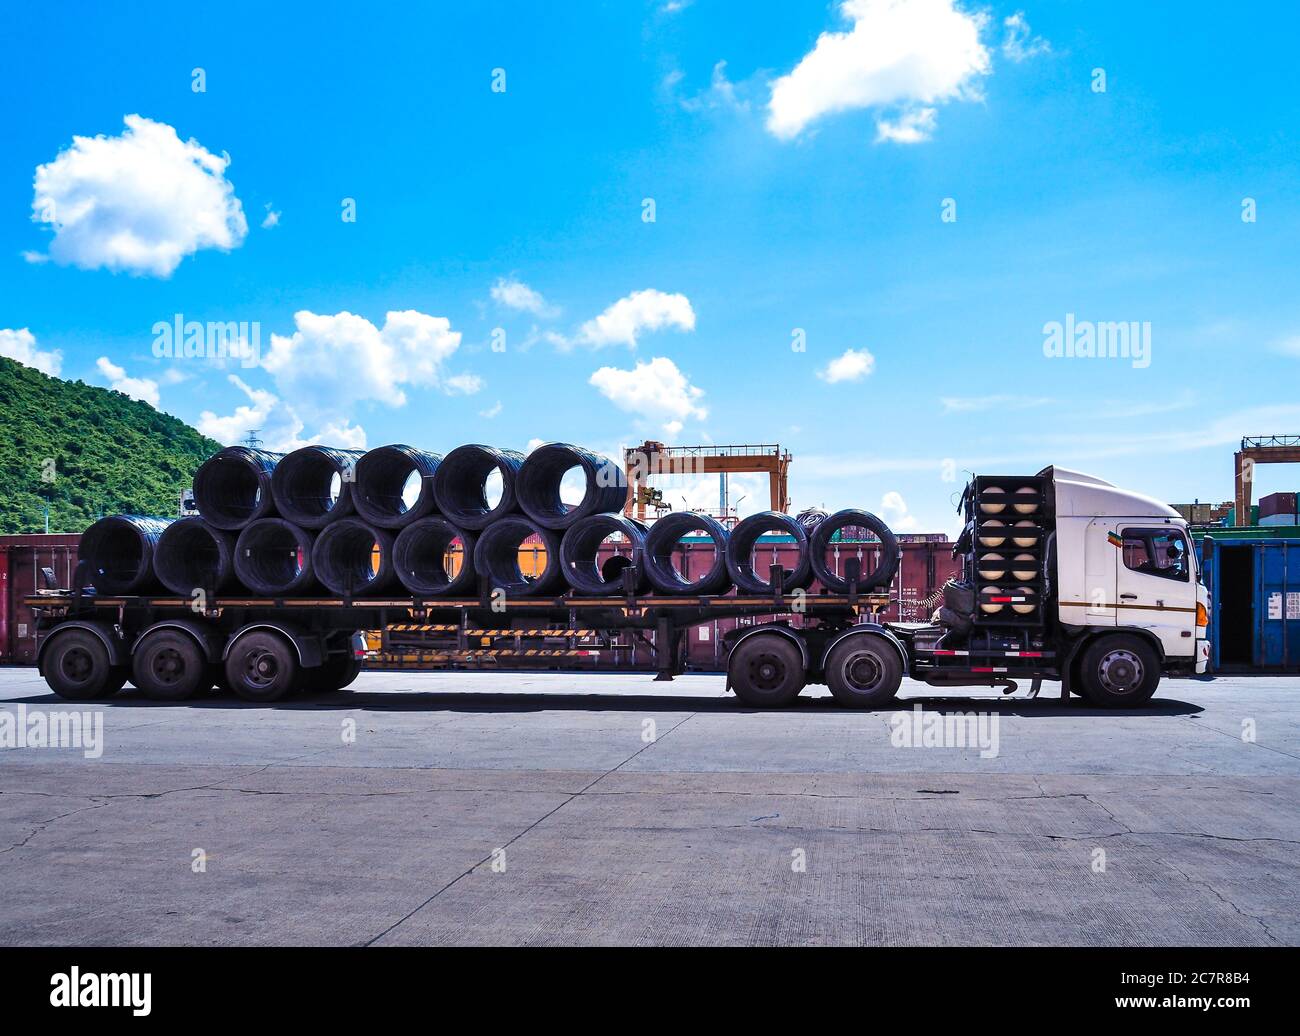 Coils of steel wire rod on truck trailer at industrial zone. Truck receives steel wire rod from warehouse container unstuffing area. Stock Photo